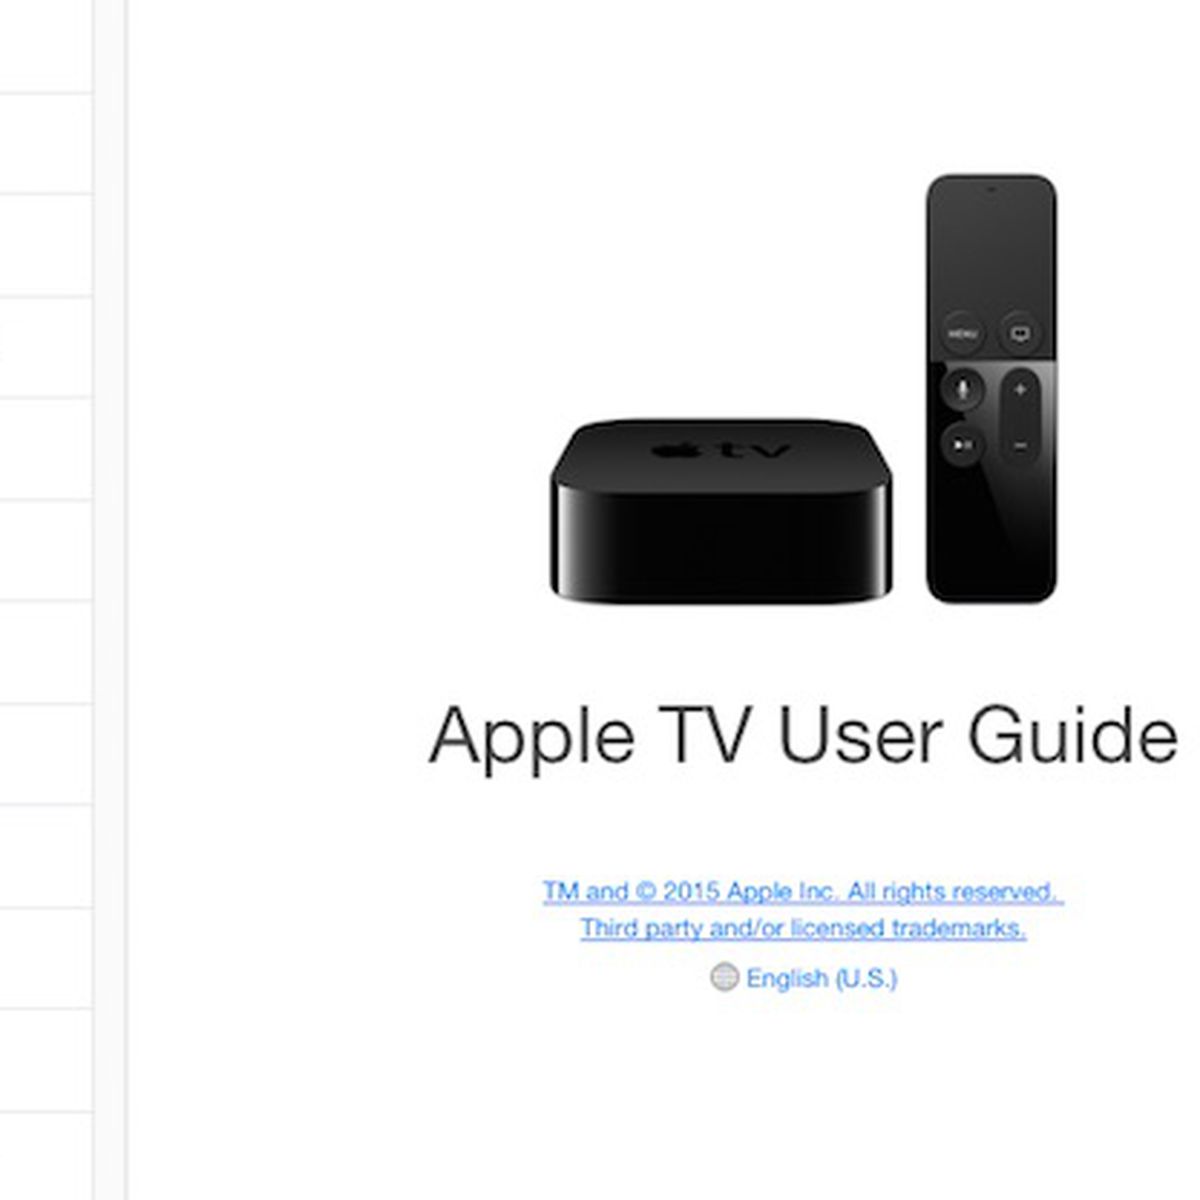 New Apple TV Tidbits: Limited App Discovery, User Guide, Amazon Pulls TVs, and More - MacRumors